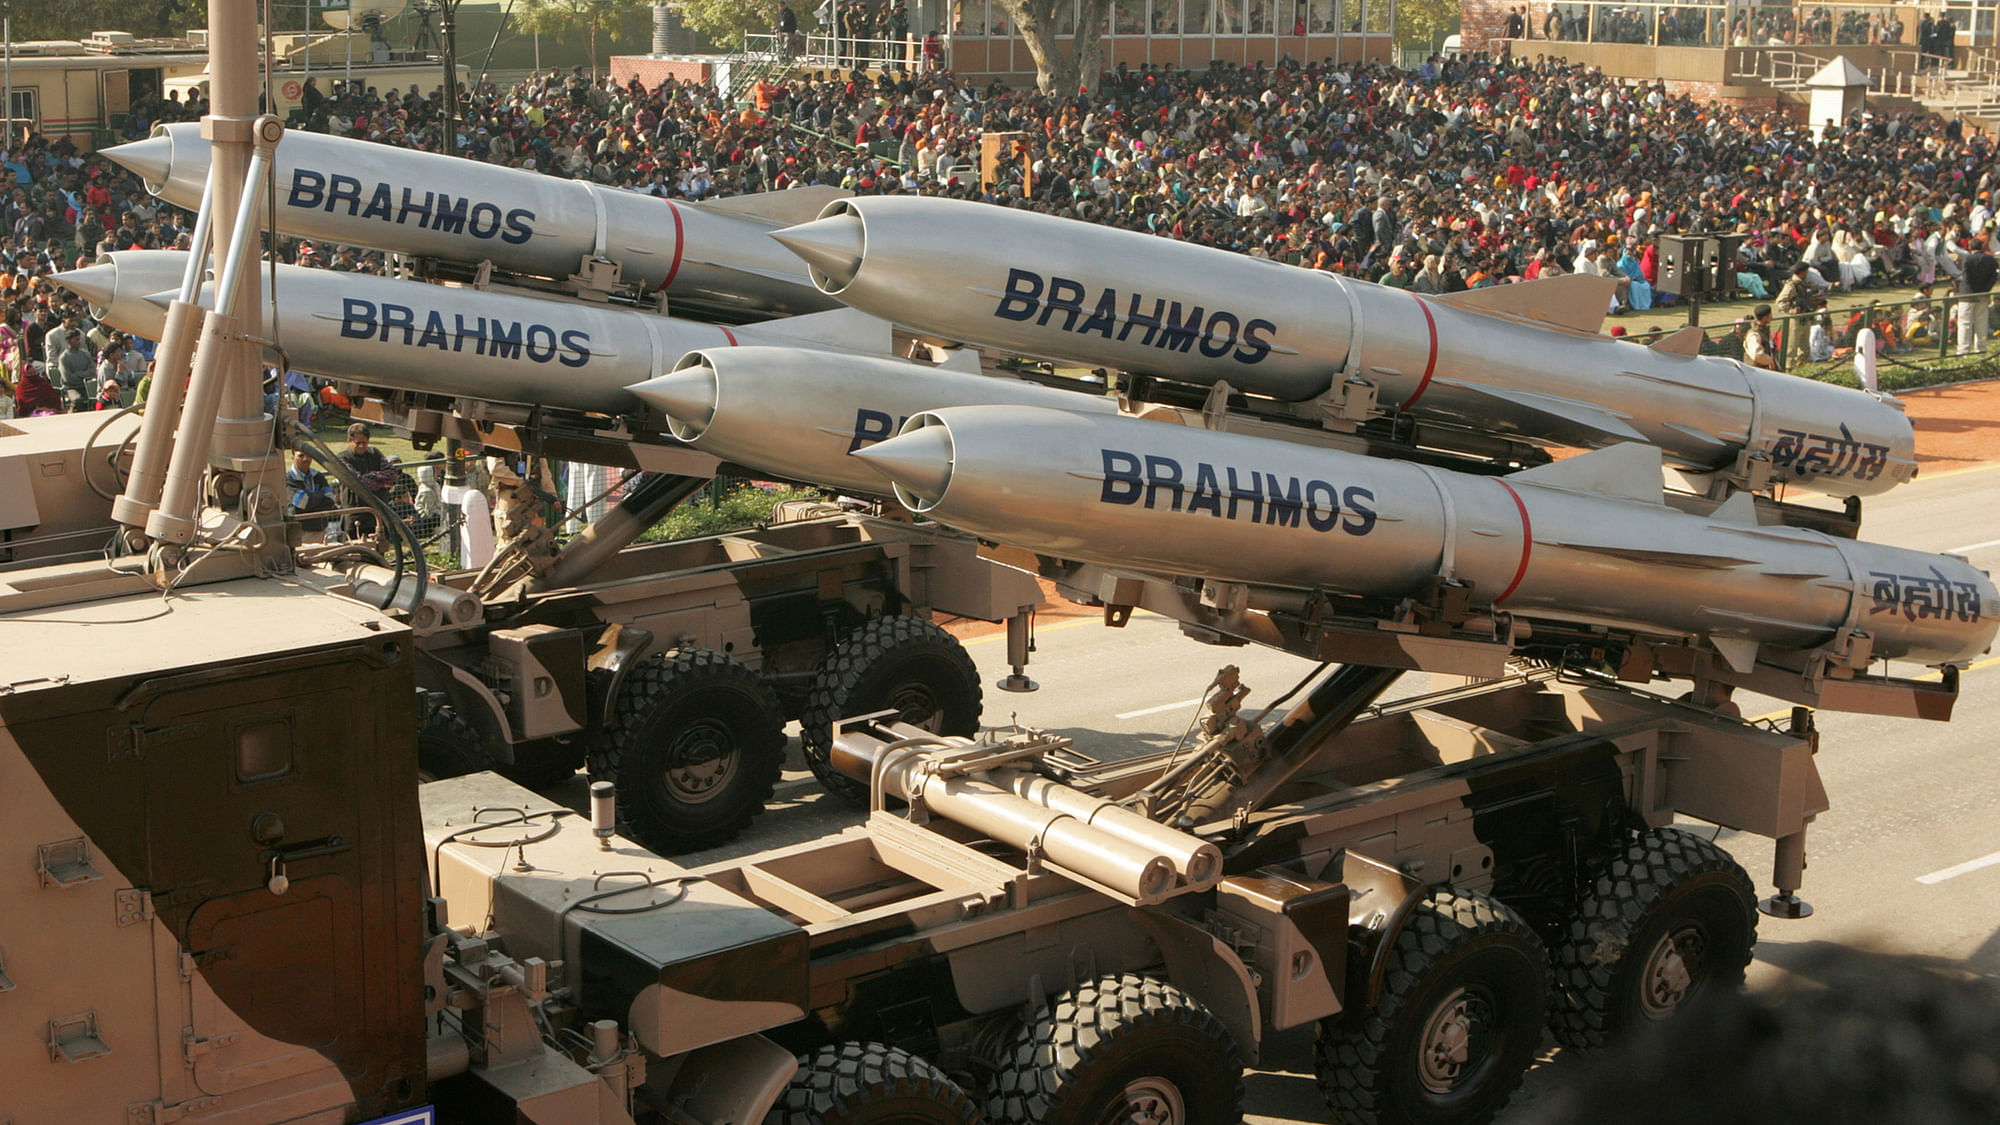 

BrahMos is stealth supersonic cruise missile that can be launched from submarines, ships, aircrafts and land. (Photo: Reuters)